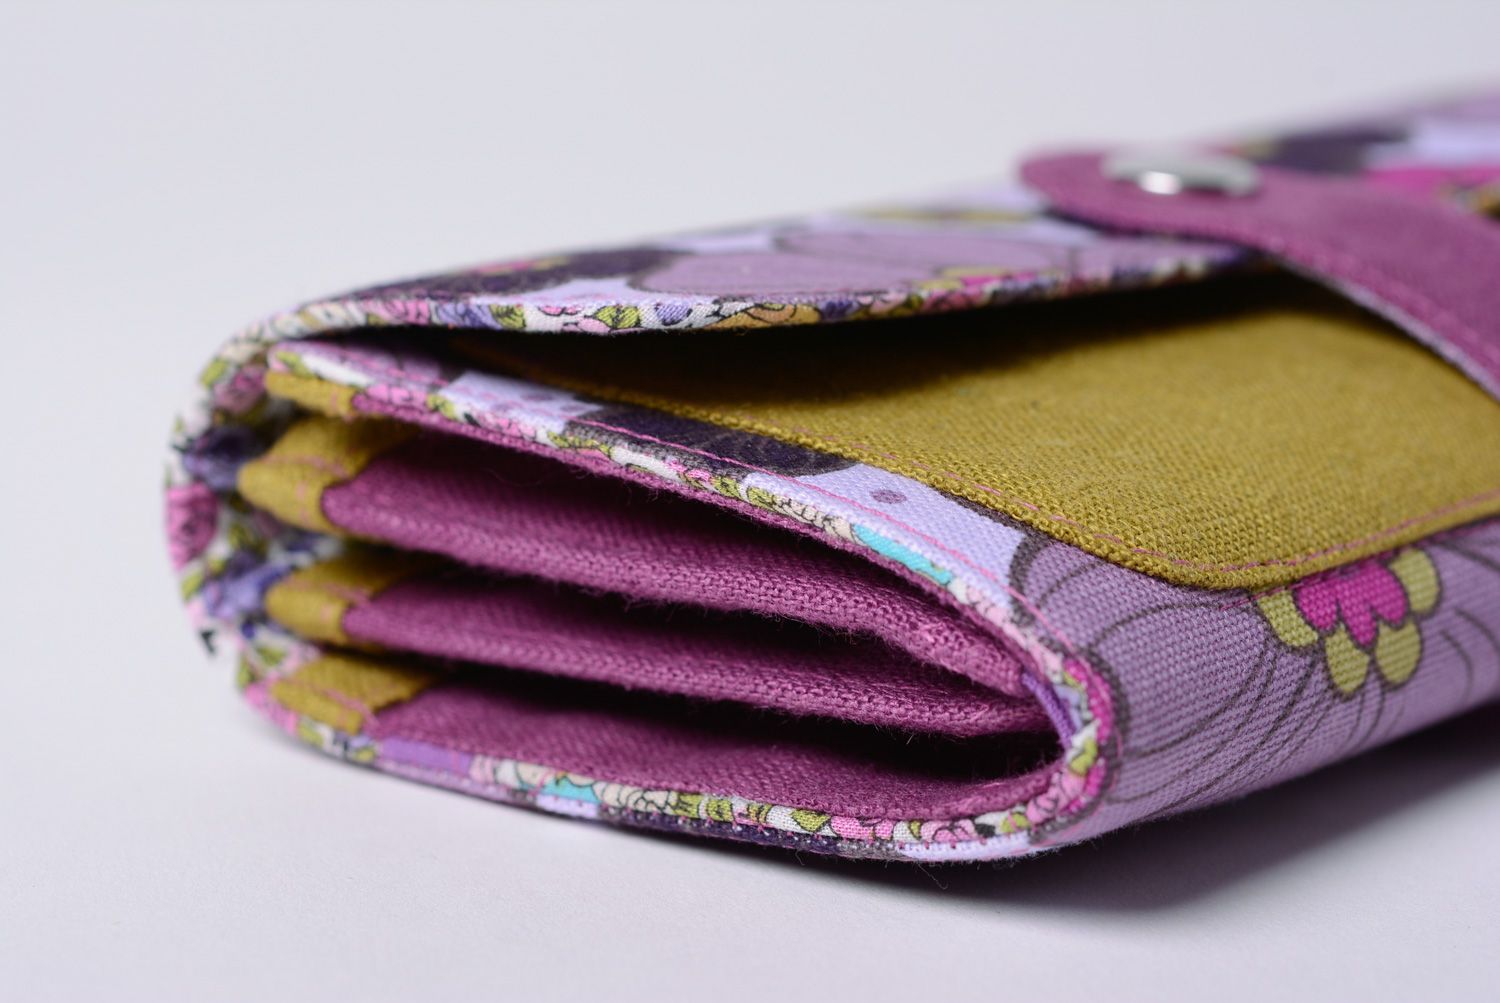 Handmade wallet sewn of cotton and linen fabrics with floral pattern with stud photo 2